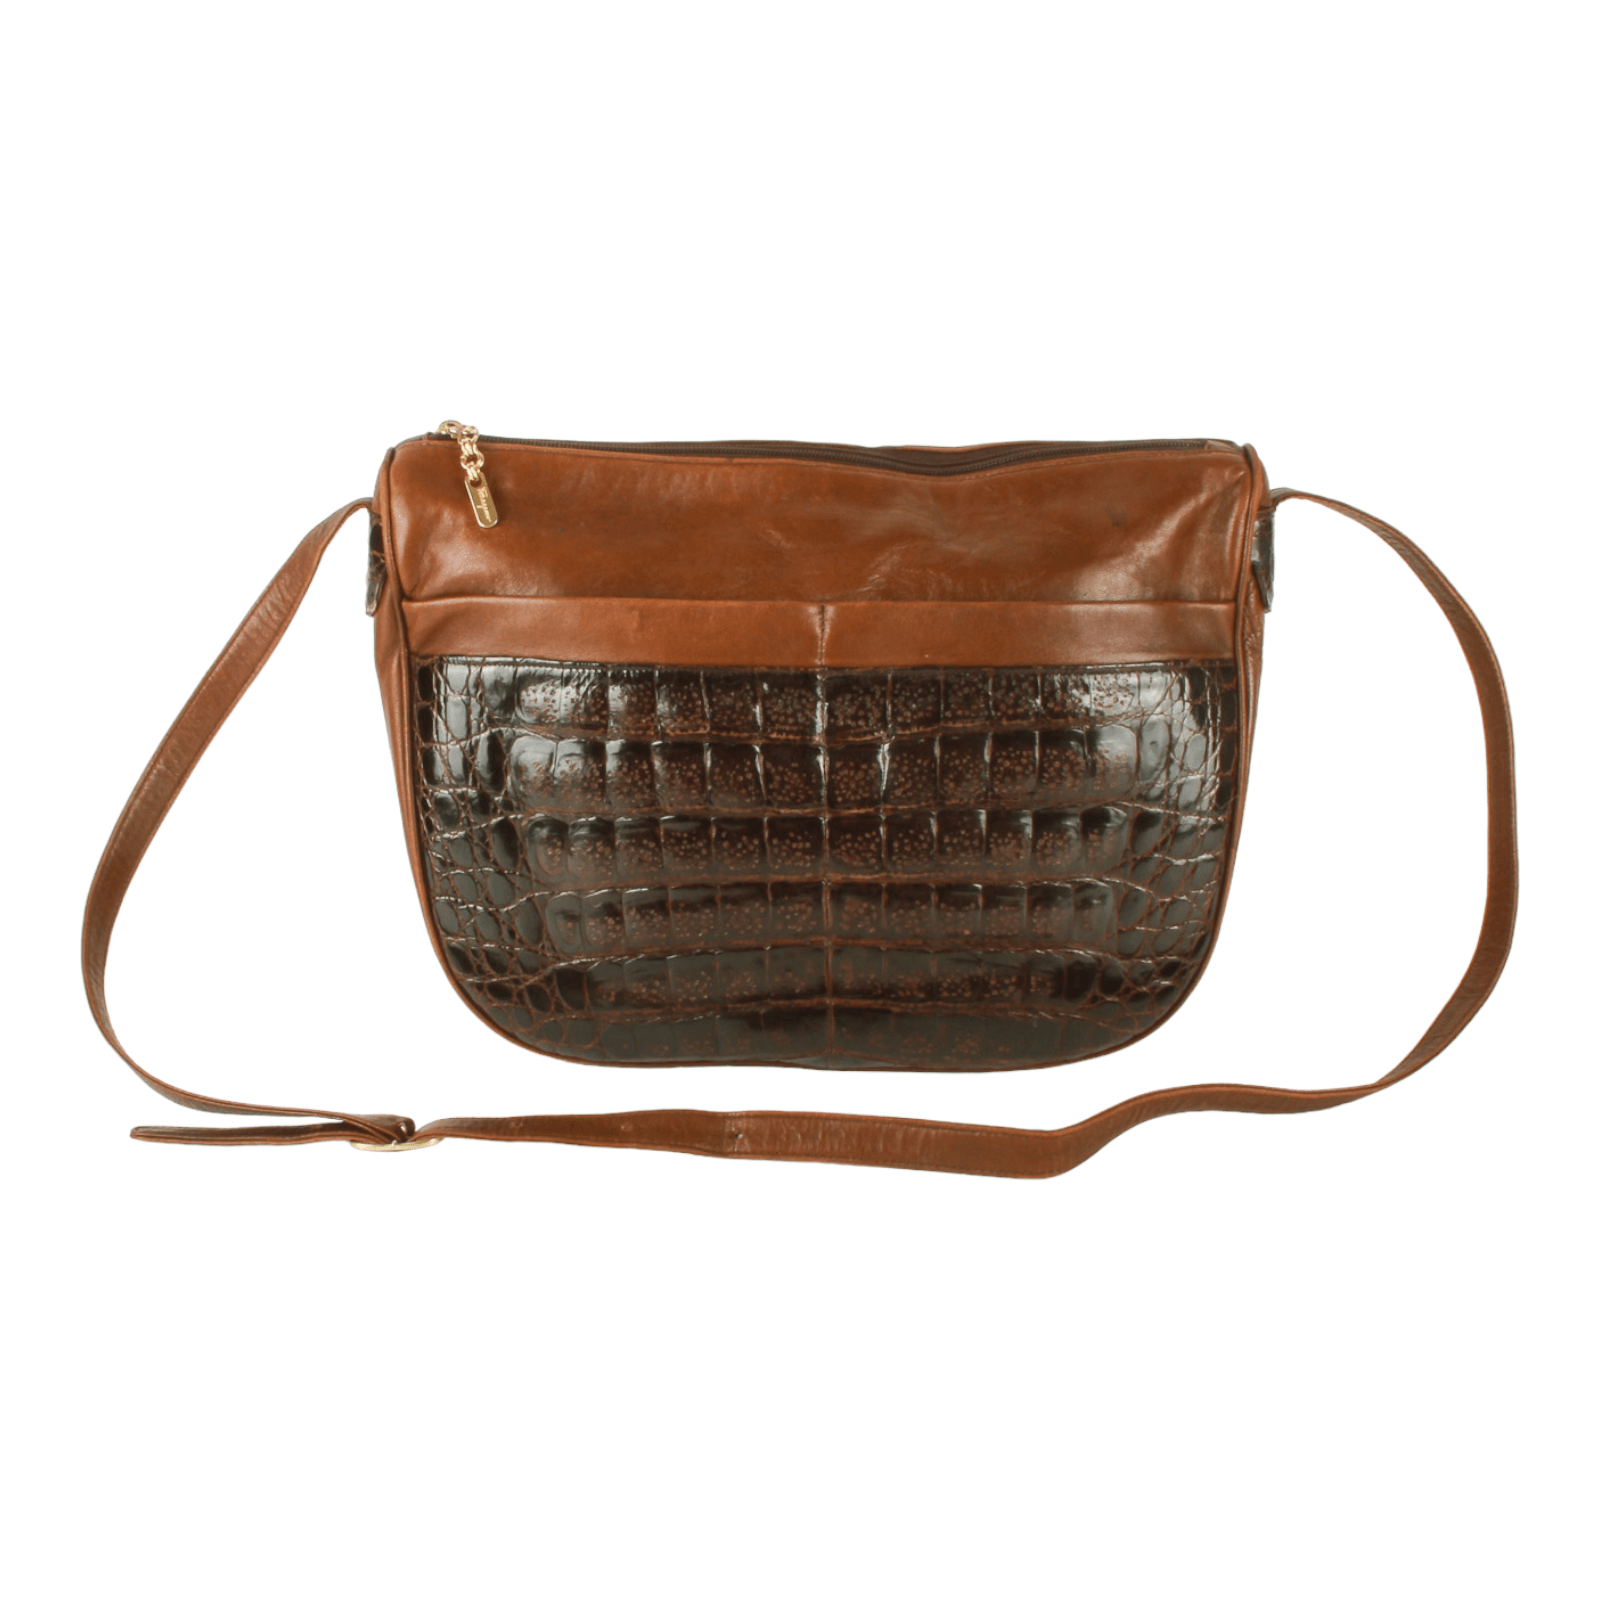 BRAND NEW Authentic Crocodile Bag (Brown) in mint condition.